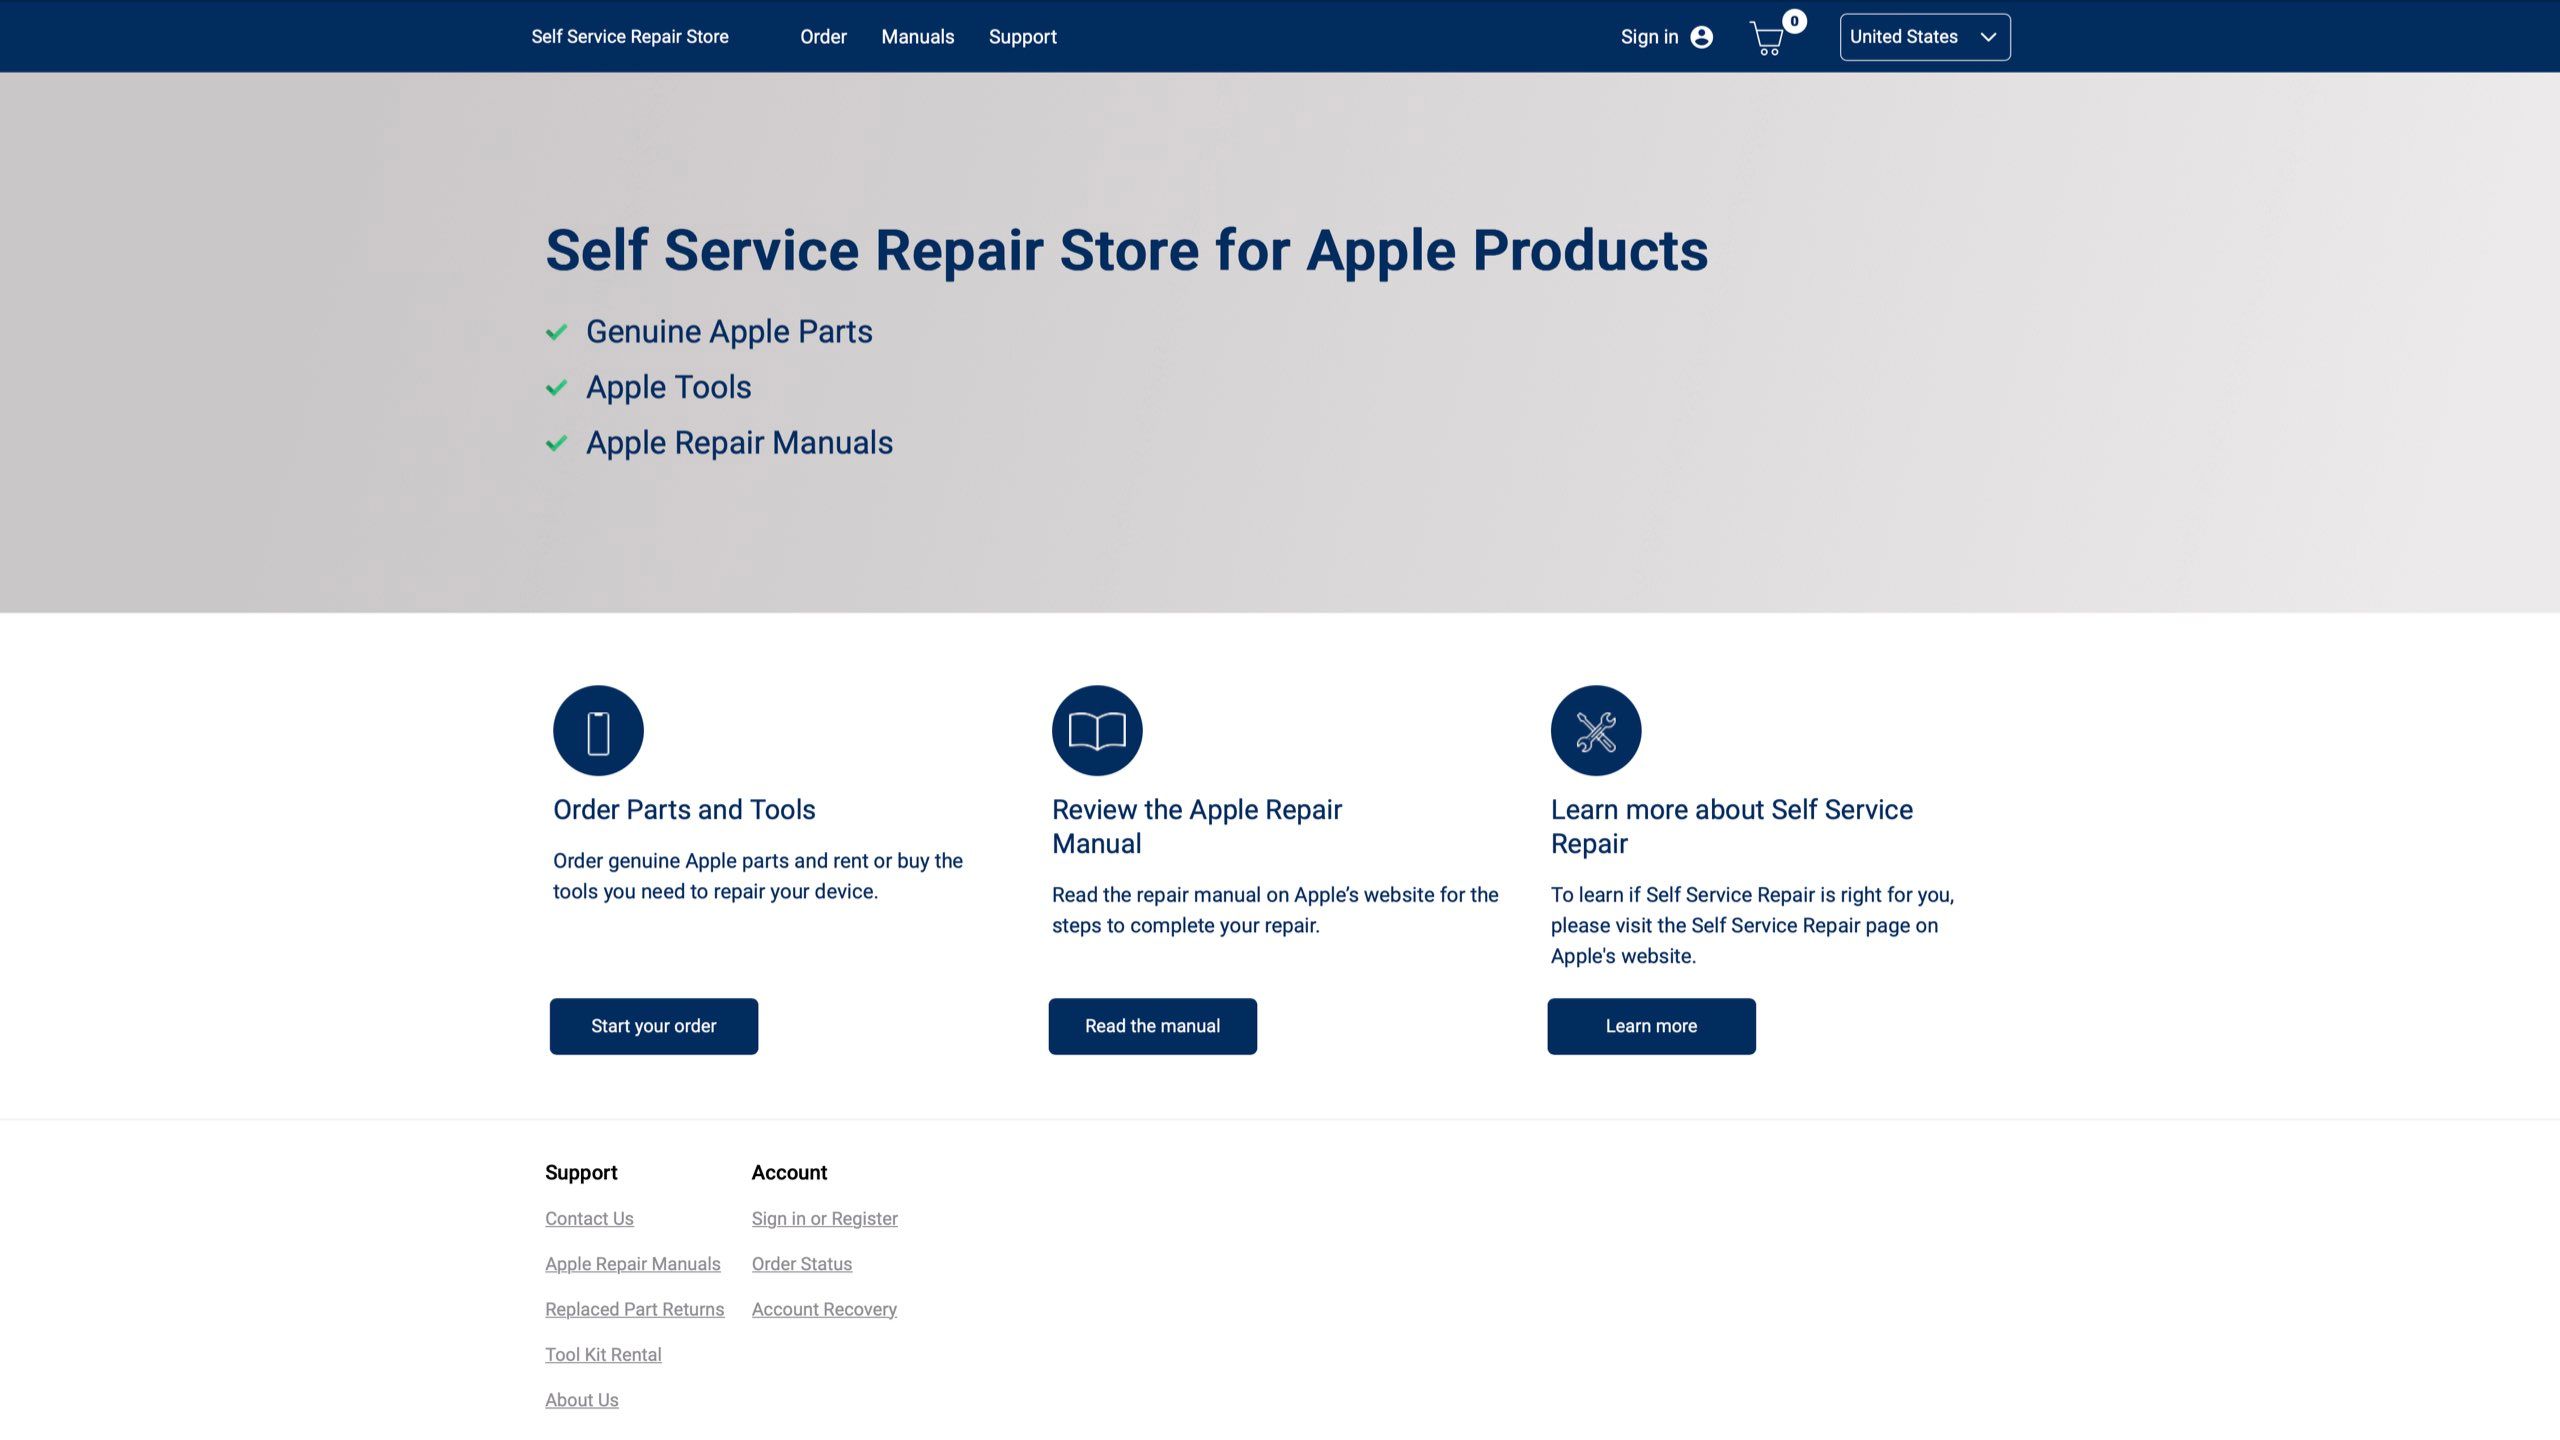 Screenshot of the Self Service Repair Store for Apple Products website.